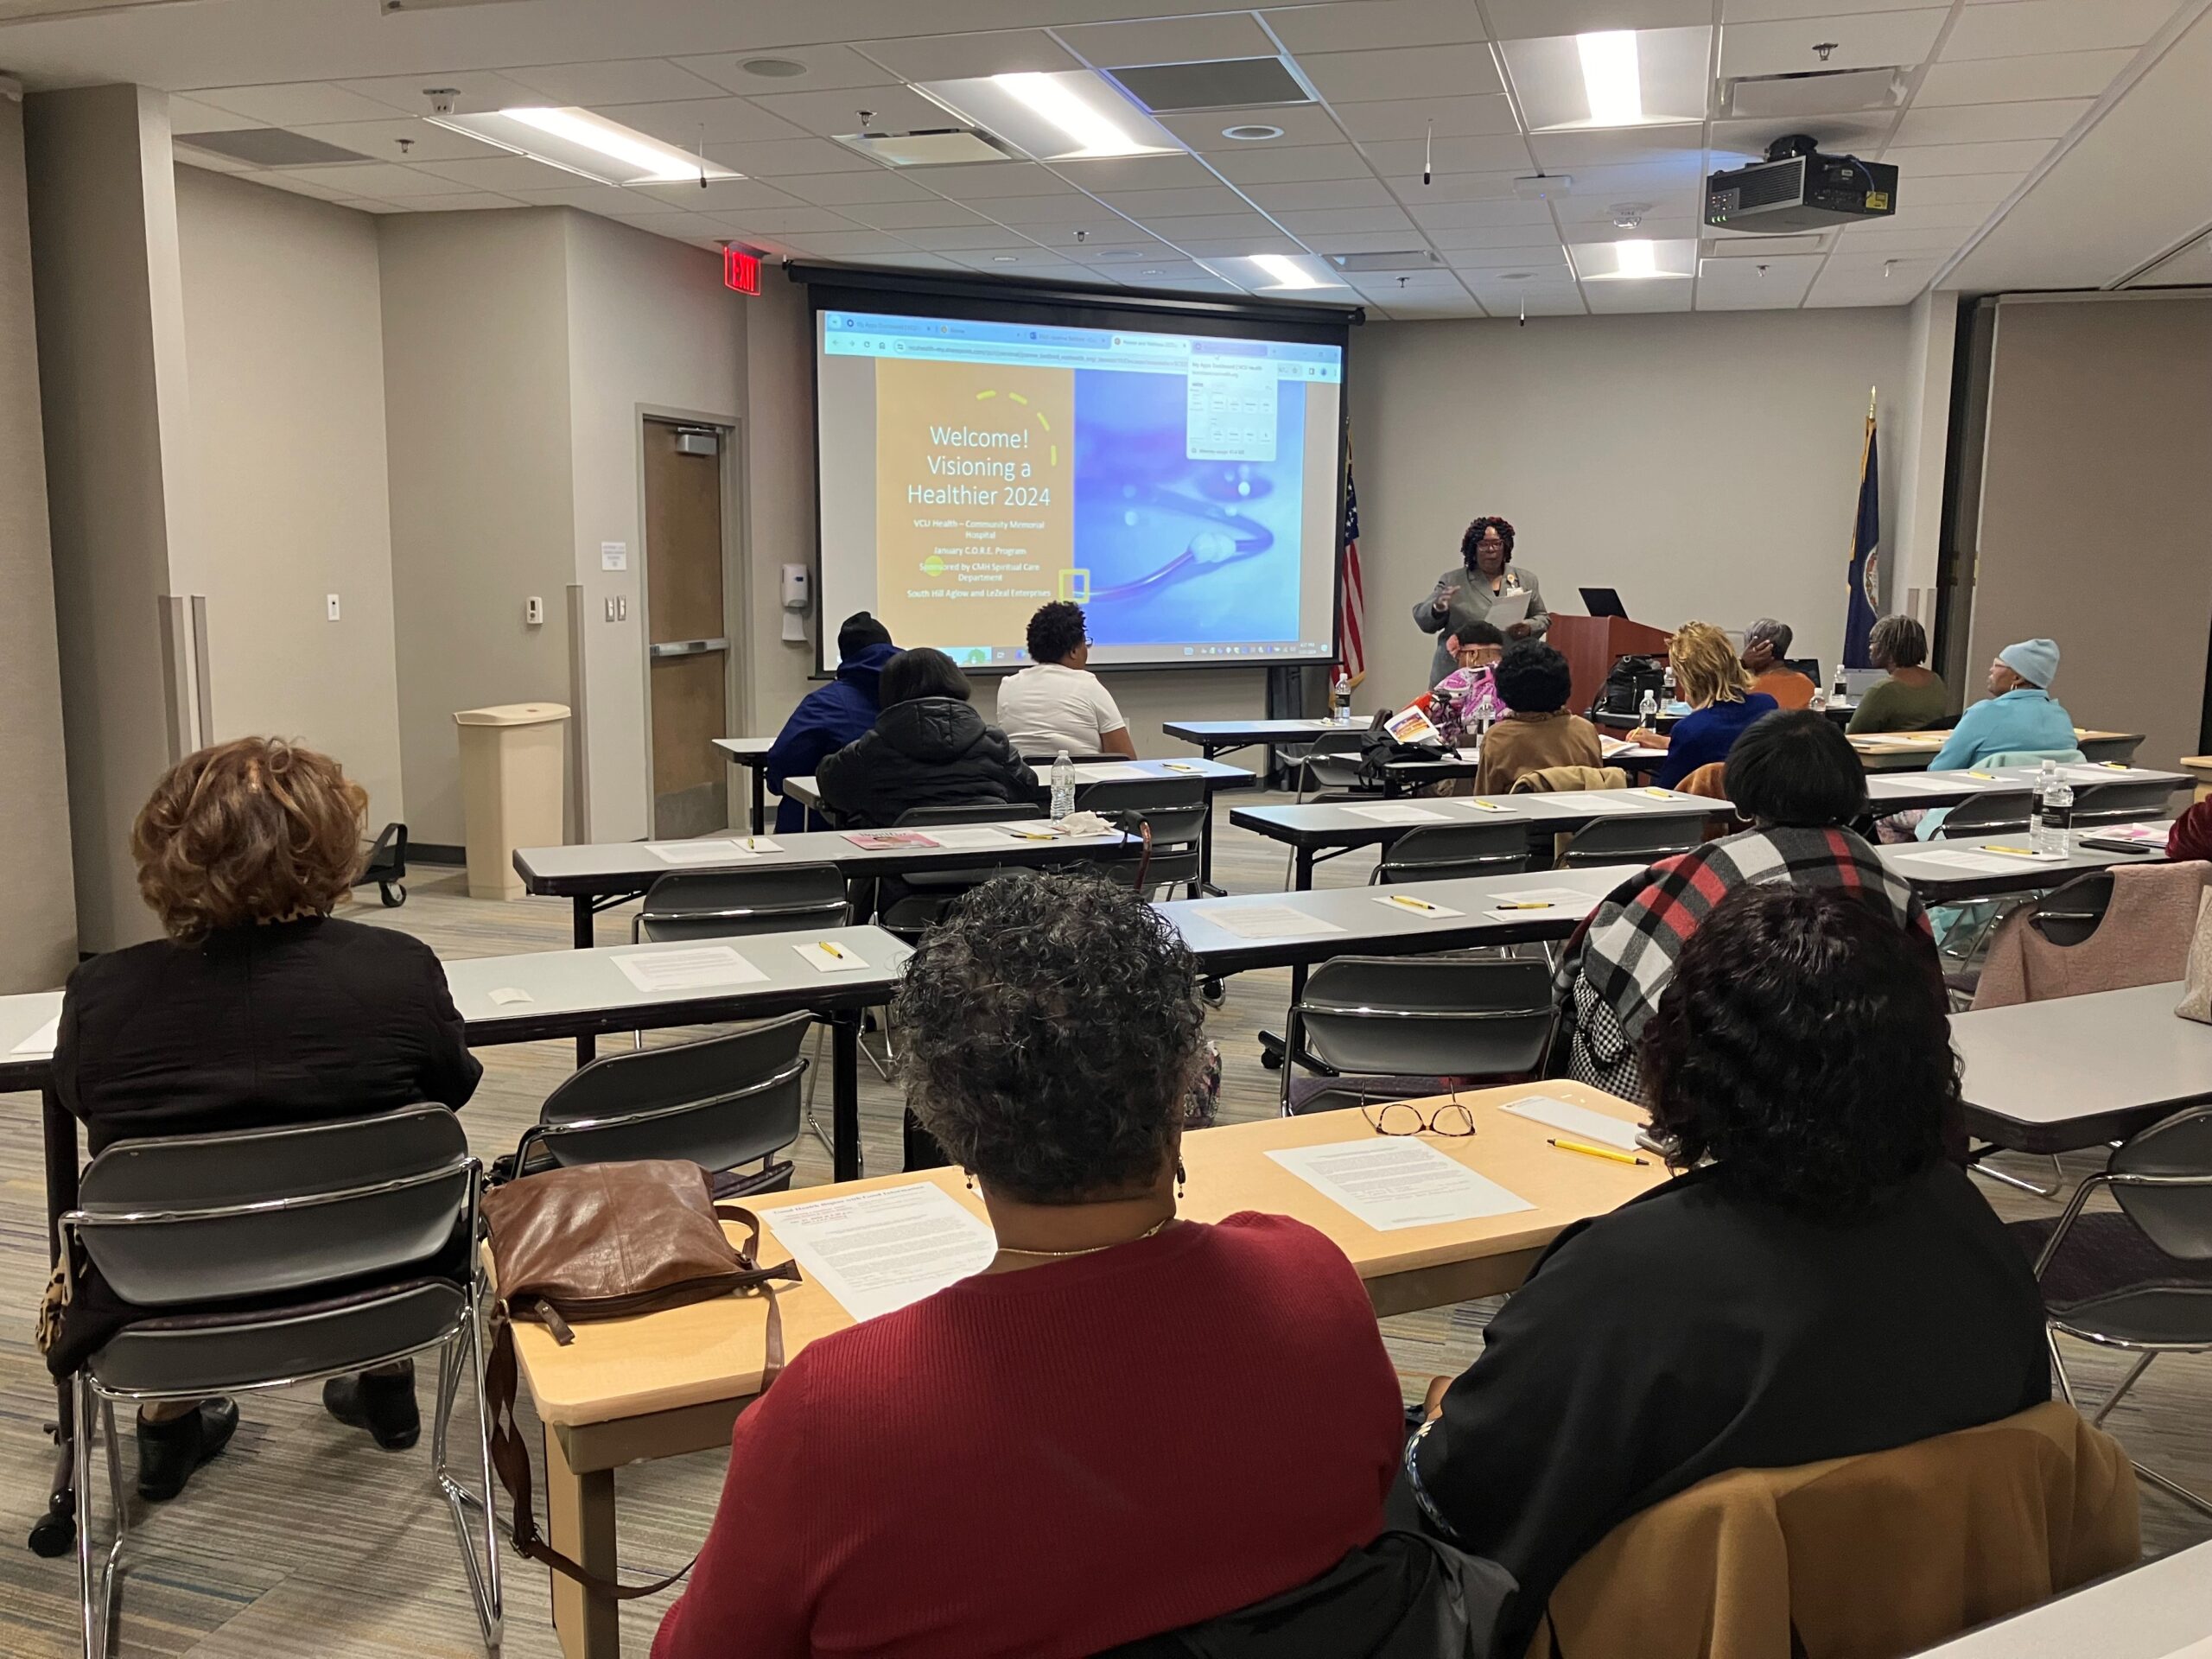 Several were in attendance at the VCU/CMH C.A.R.E. Building for "Visioning a Healthier 2024" event.